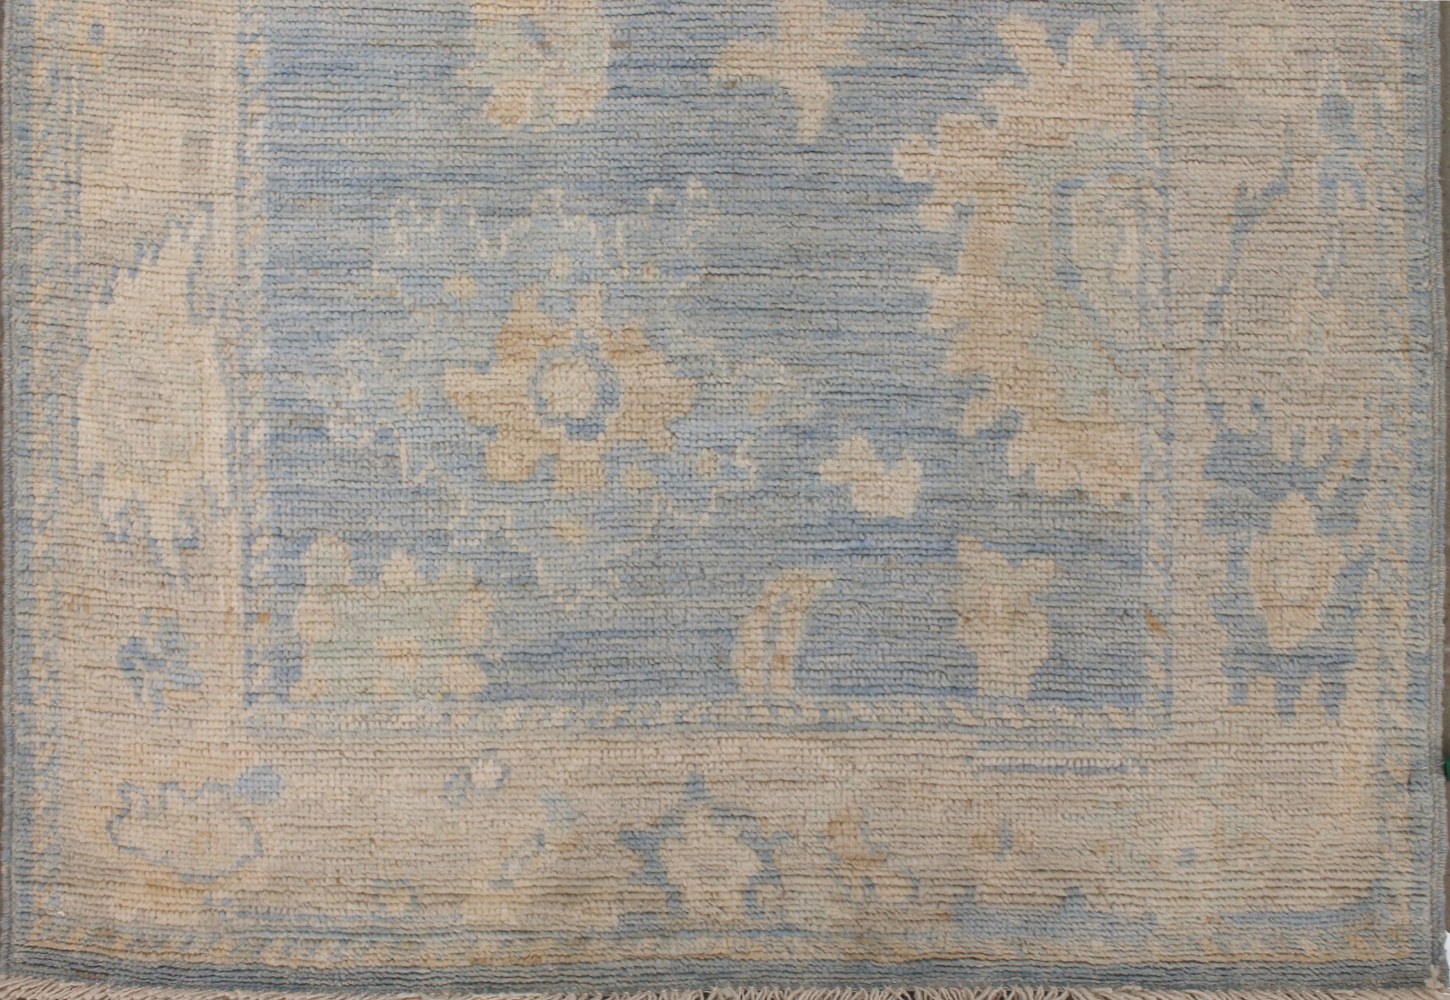 3x5 Oushak Hand Knotted Wool Area Rug - MR027905